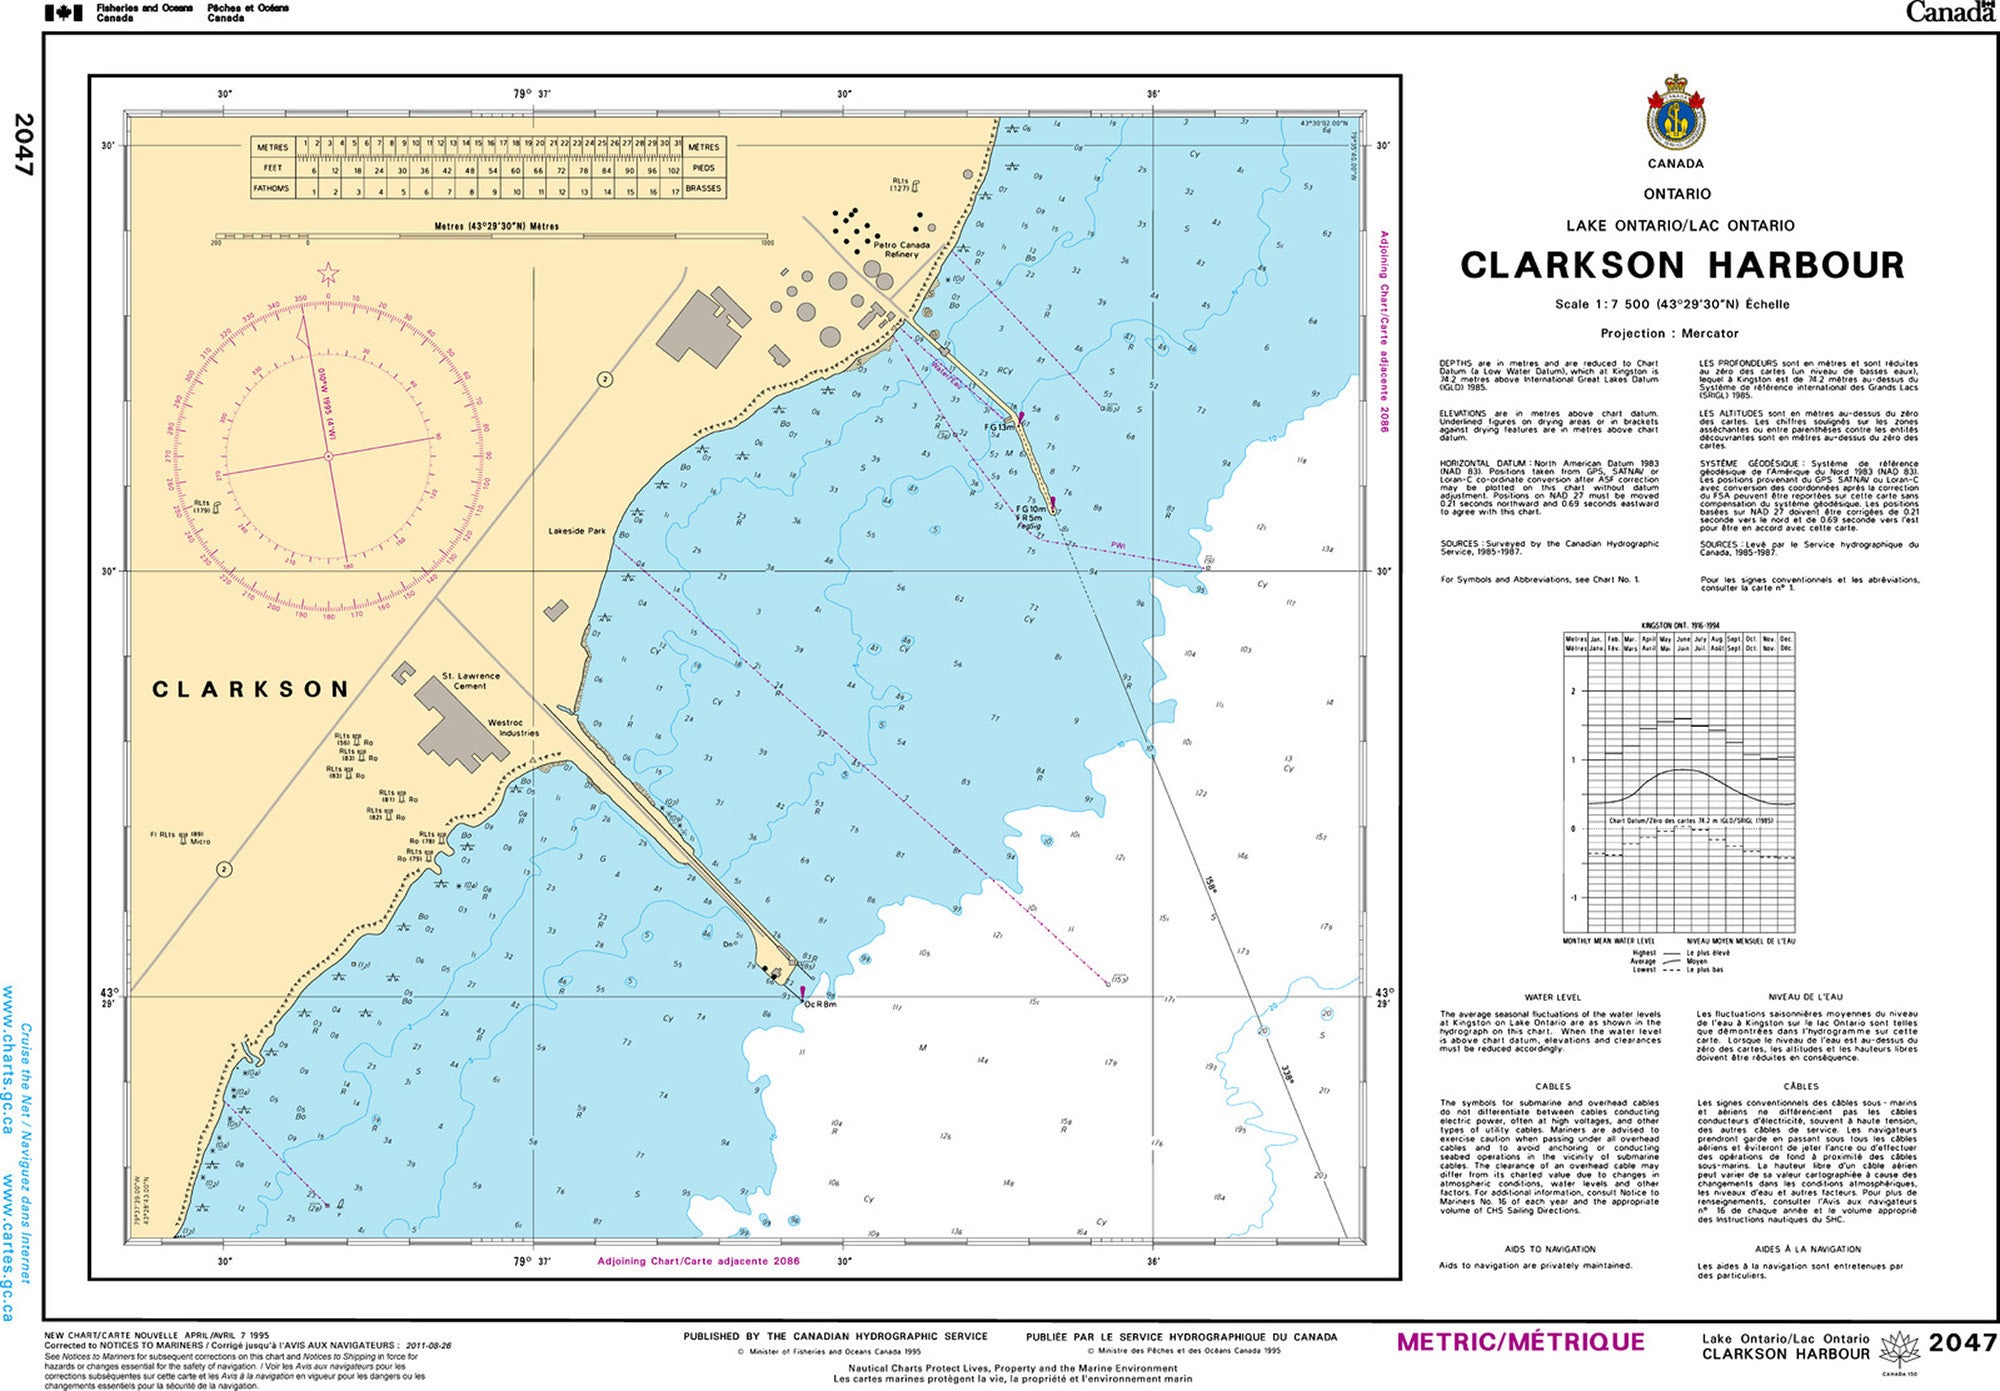 Canadian Hydrographic Service Nautical Chart CHS2047: Clarkson Harbour